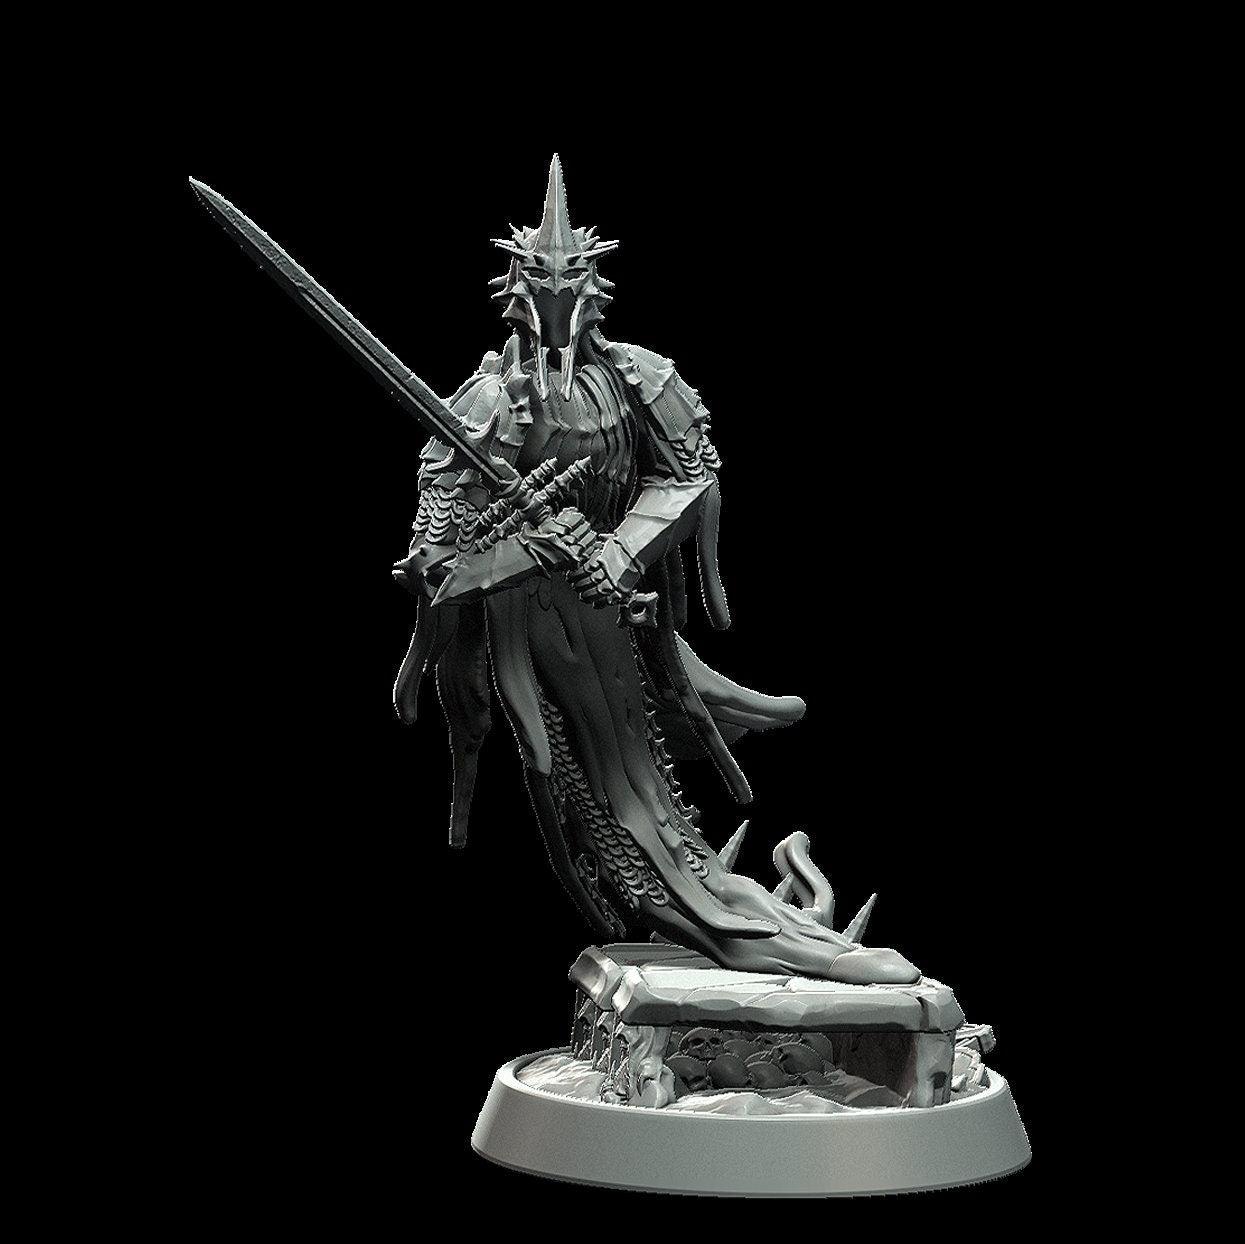 Wretched Soul Miniature - 3 Poses - 28mm scale Tabletop gaming DnD Miniature Dungeons and Dragons, dnd 5e - Plague Miniatures shop for DnD Miniatures